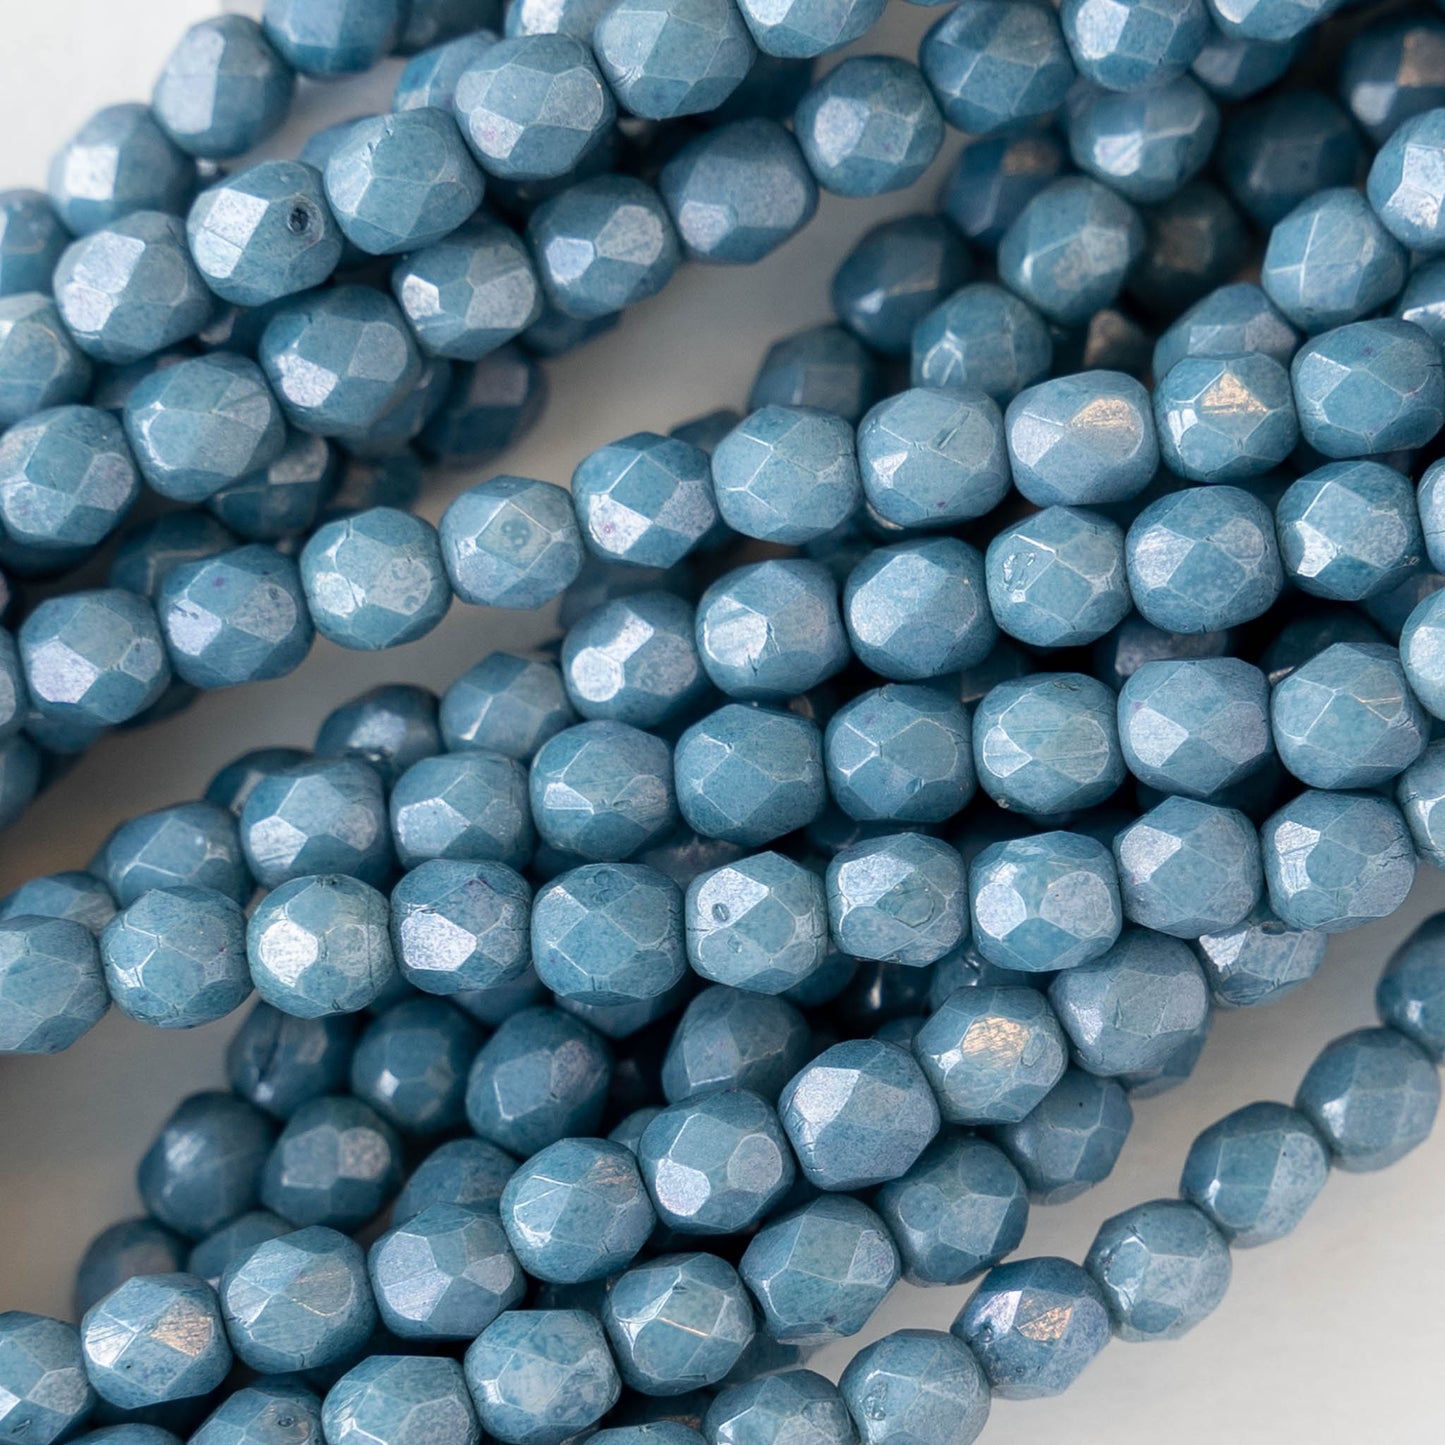 4mm Round Firepolished Beads - Slate Blue Luster - 50 Beads